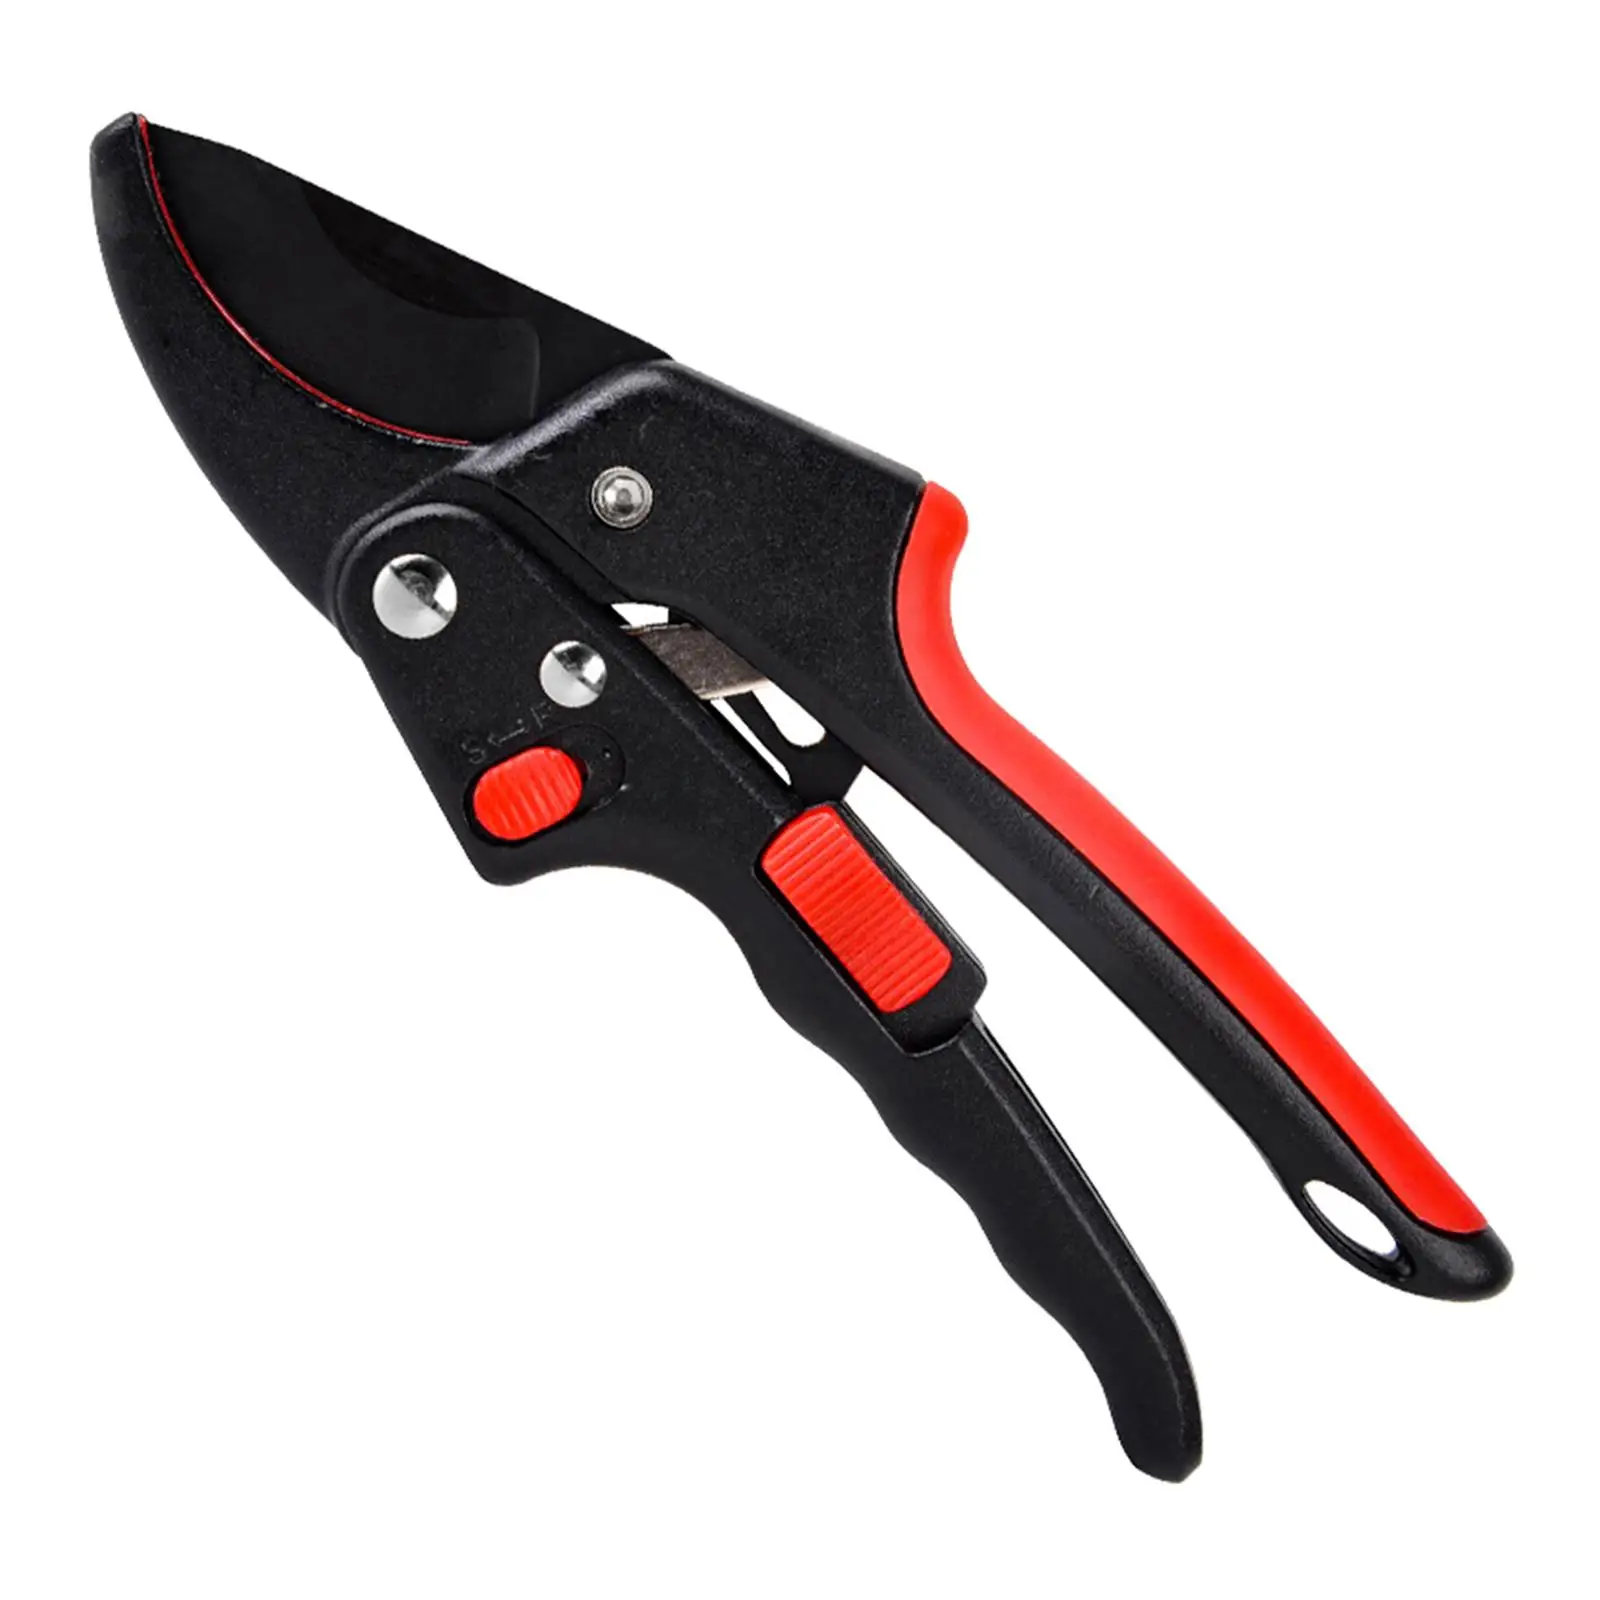 Garden Clippers Adjustable Gardening Accessory Heavy Duty Multipurpose Pruning Shear Garden Pruners for Park Orchard Bonsai